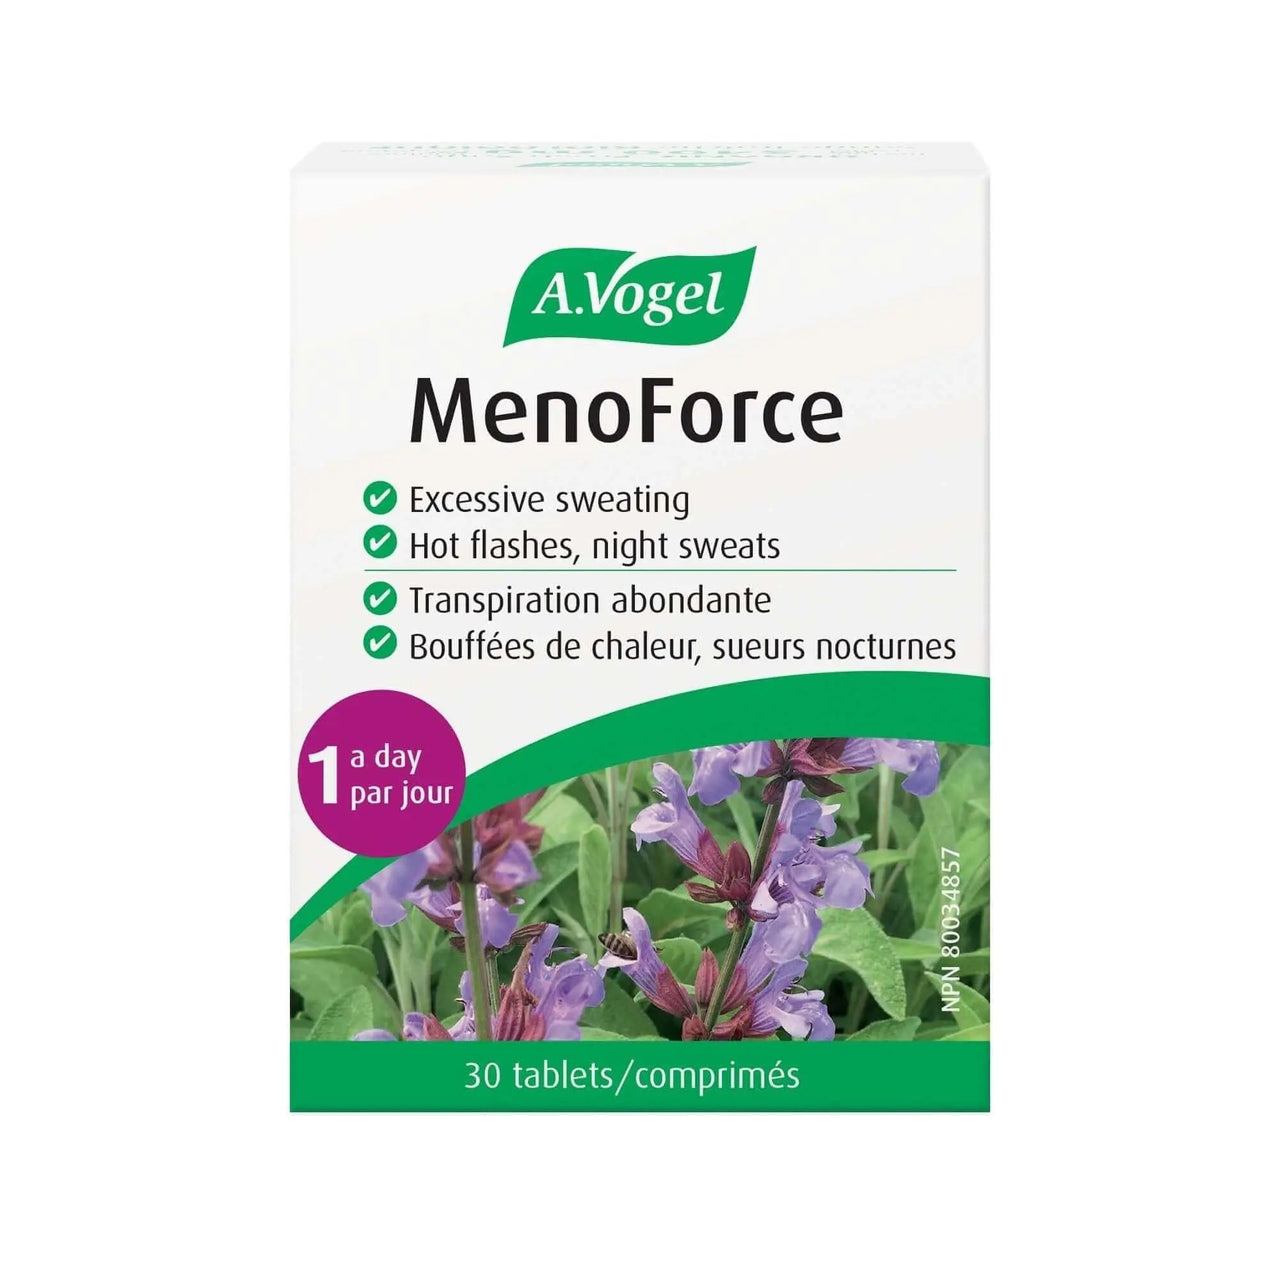 A. Vogel MenoForce Menopause Supplement For Hot Flashes 30 Tablets - Nutrition Plus